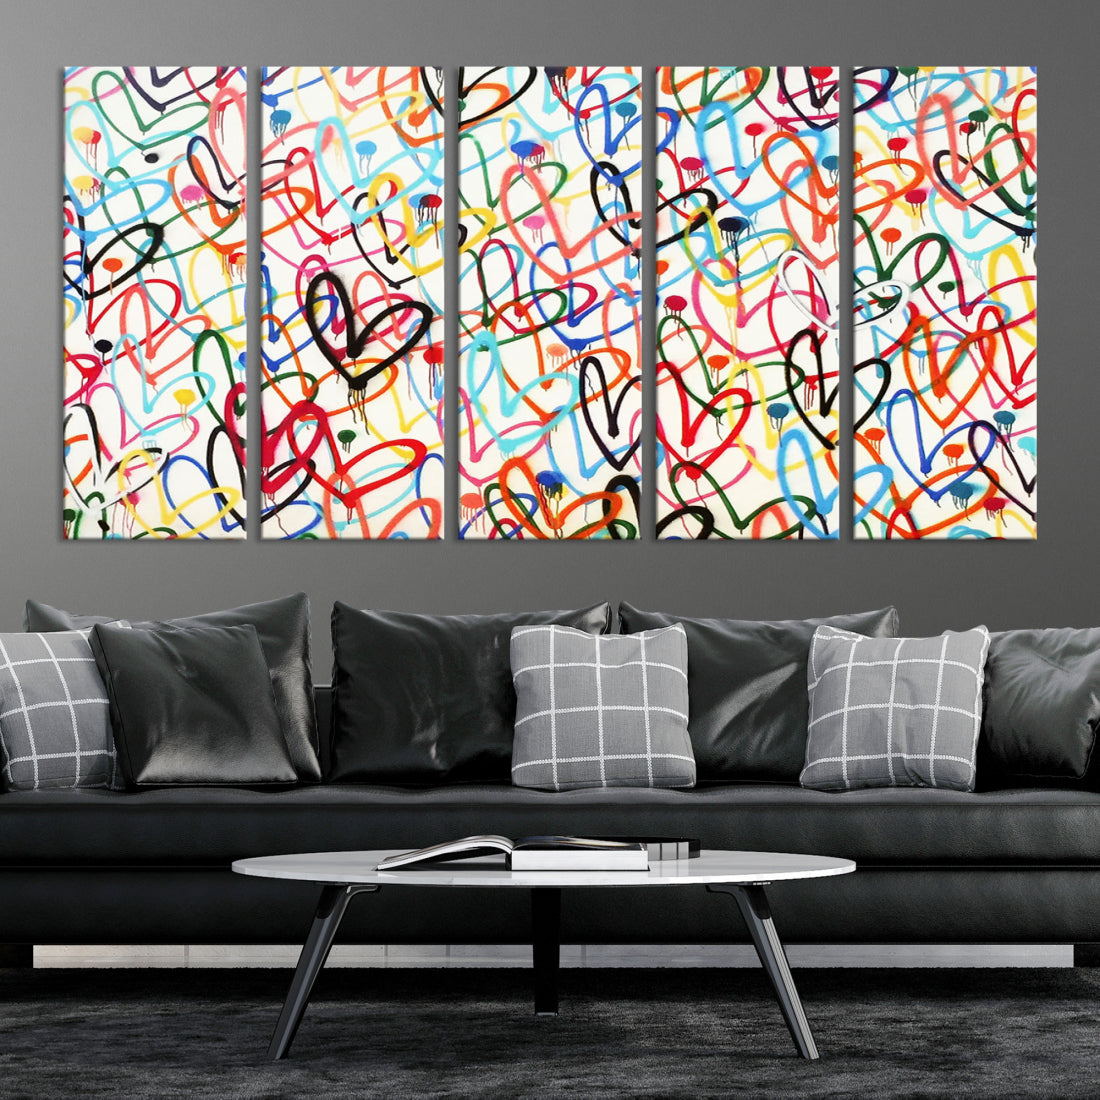 Lovely Hearts on Canvas Wall Art Abstract Love Canvas Art Print Framed Set of 3